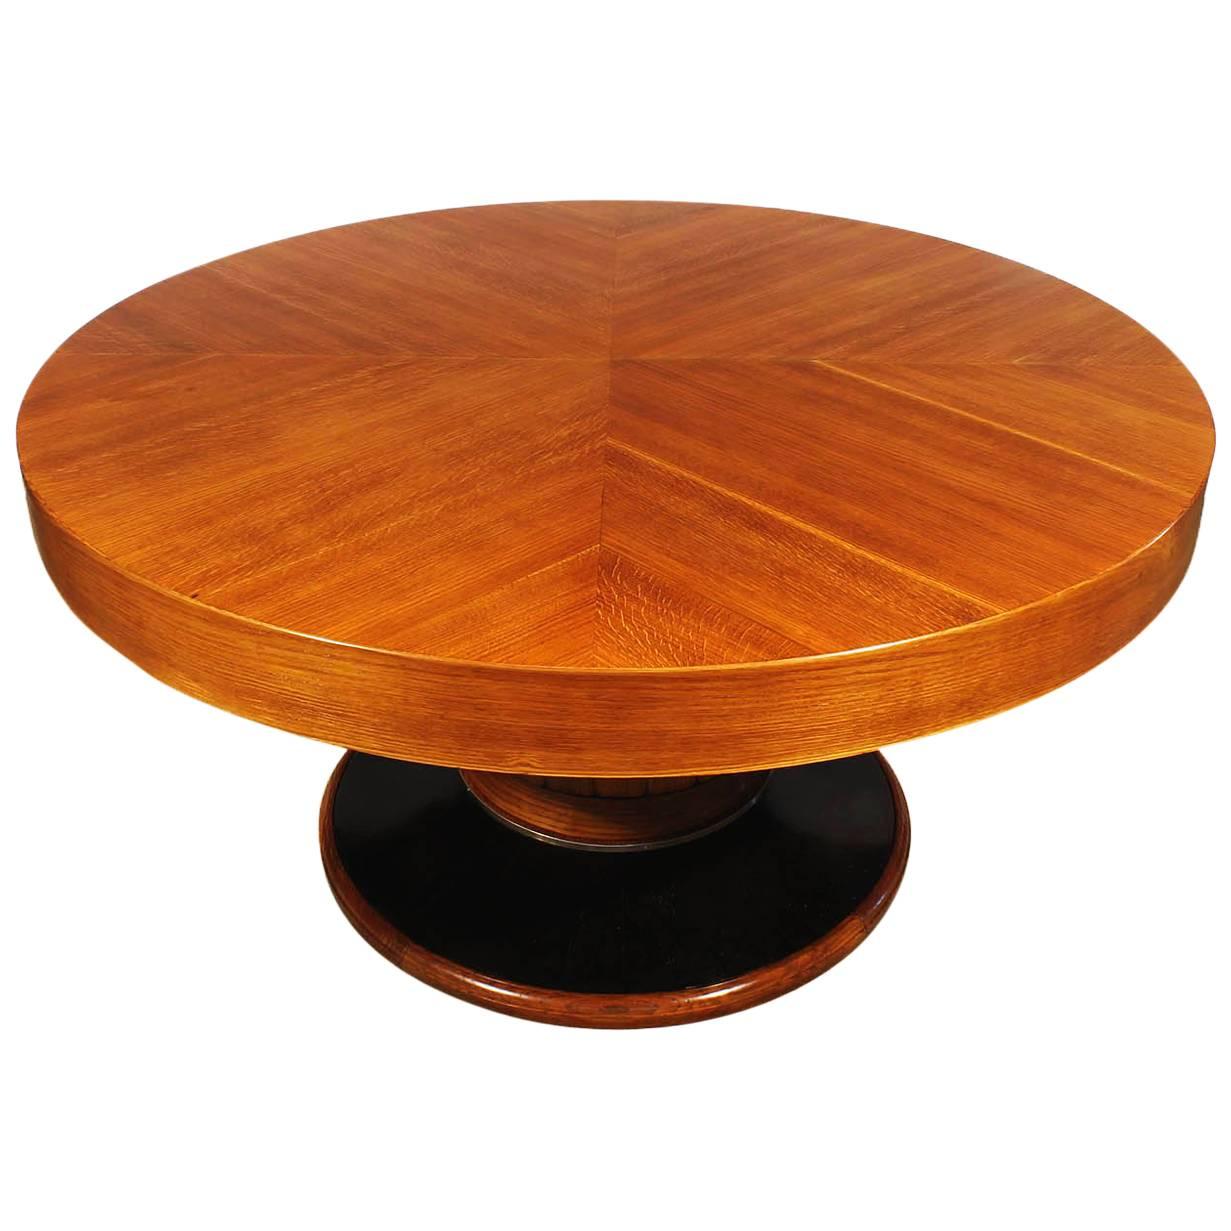 1930´s Big Art Deco Round Table, oak and veneer, brass ring - Barcelona, Spain For Sale